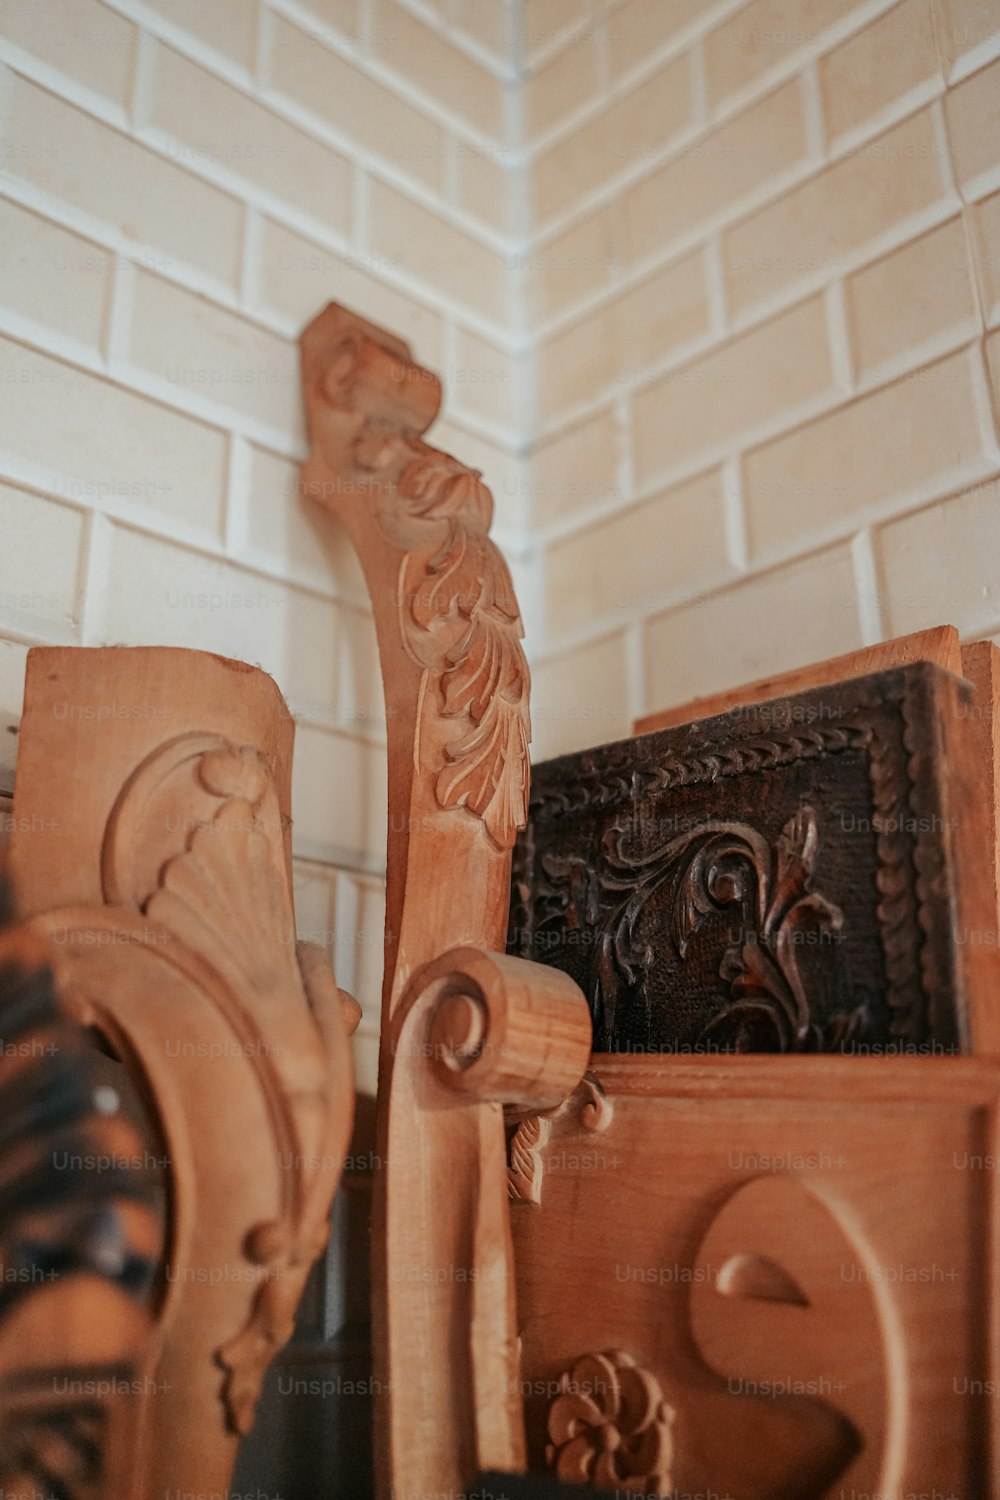 a close up of a wooden chair with a brick wall in the background